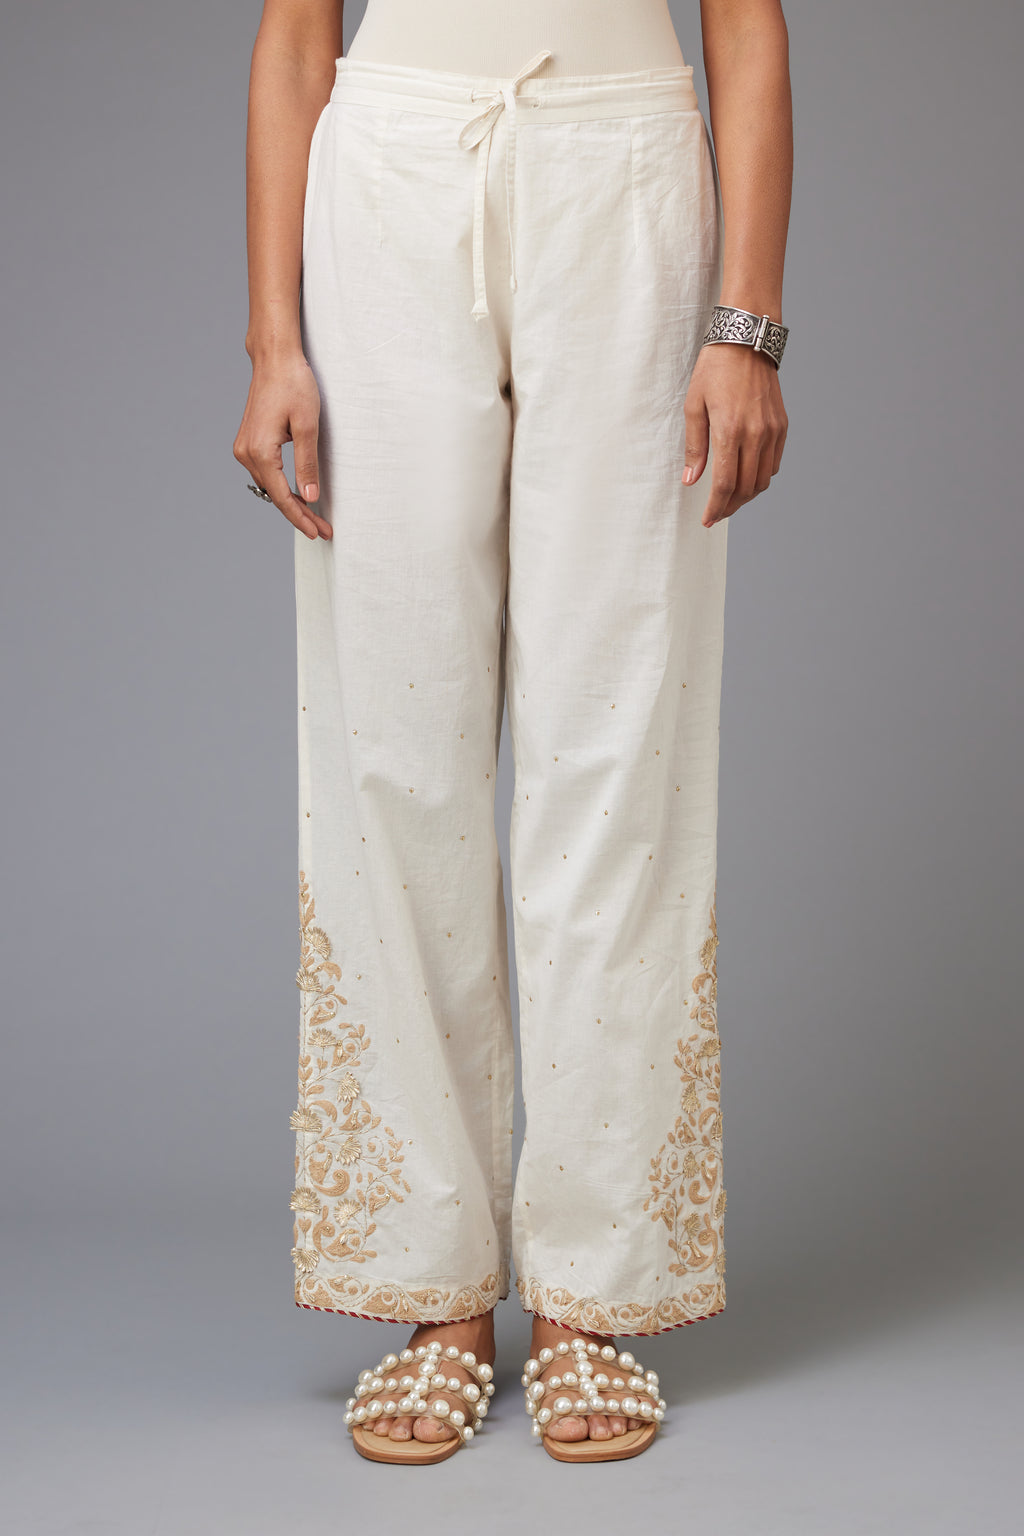 Off-white cotton straight pants, hem is detailed with dori and gota embroidered boota at sides.